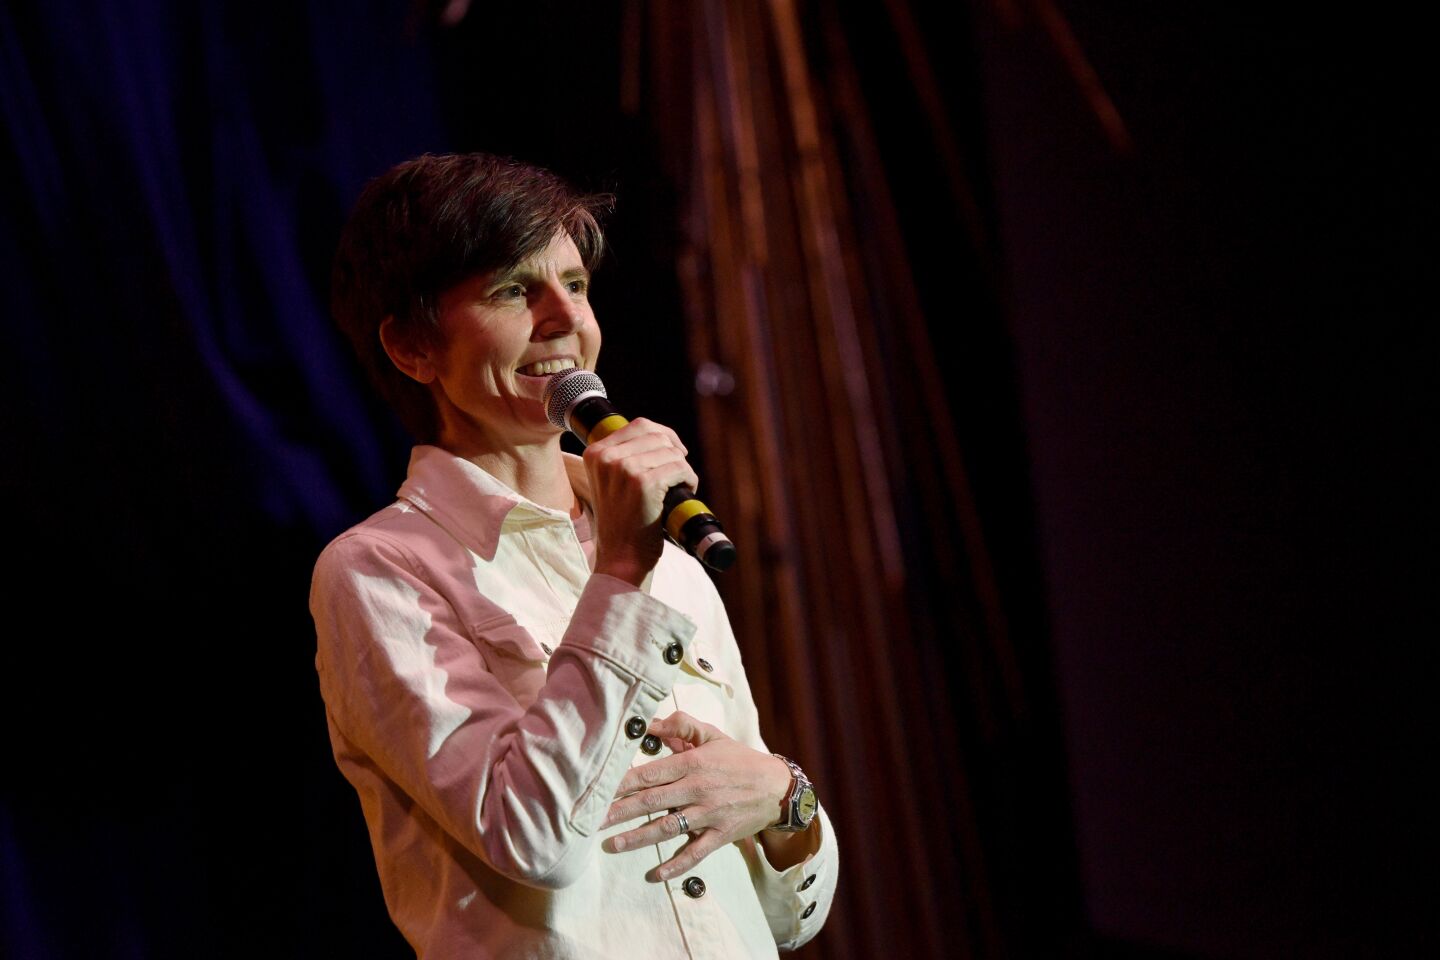 NEW YORK, NY - NOVEMBER 09: Tig Notaro performs onstage at Team Coco House during New York Comedy Festival on November 9, 2018 in New York City. 454117 (Photo by Bryan Bedder/Getty Images for Turner)